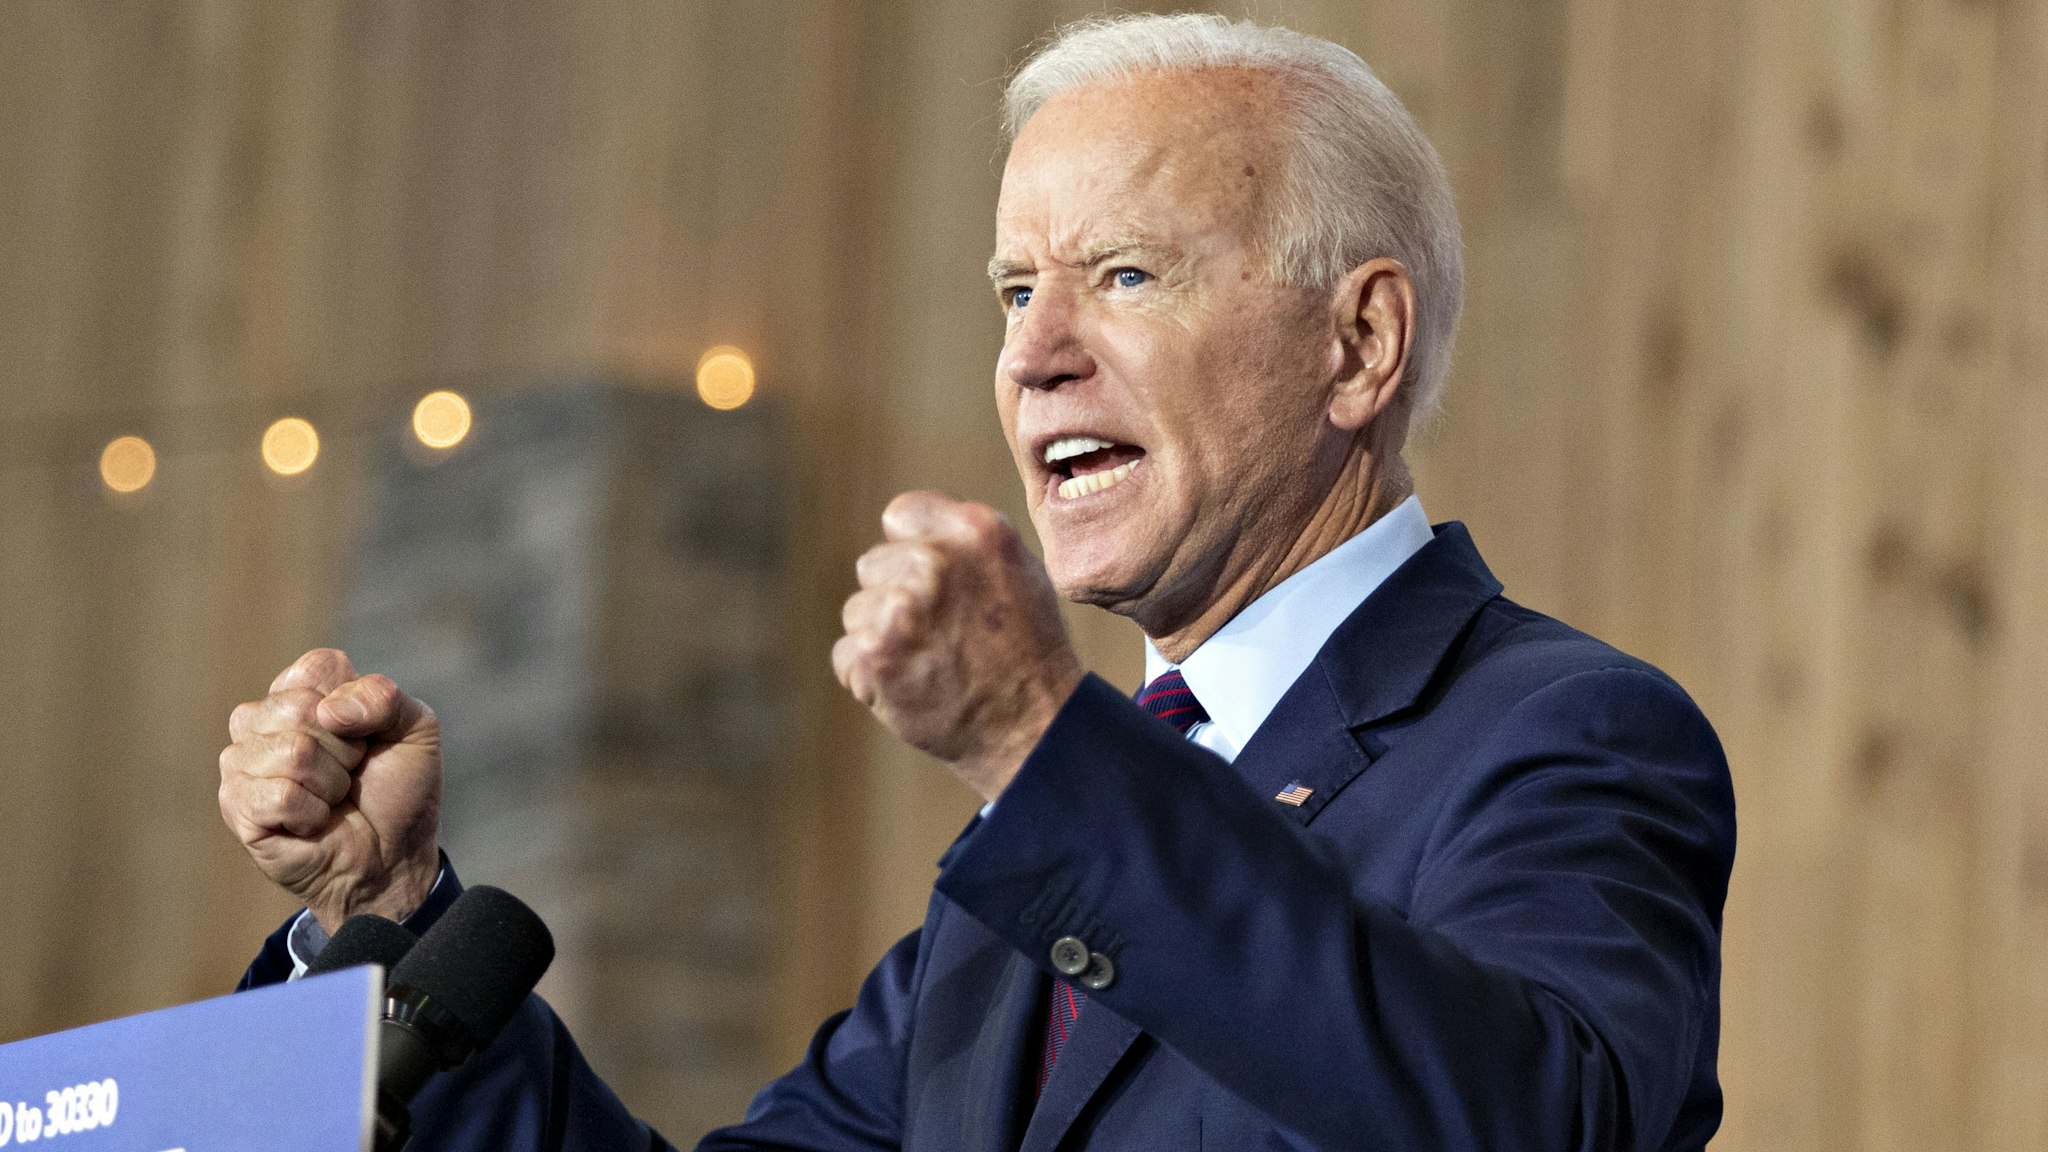 Former U.S. Vice President Joe Biden, 2020 Democratic presidential candidate, speaks during a campaign event in Burlington, Iowa, U.S., on Wednesday, Aug. 7, 2019. President Donald Trump has encouraged white supremacy to come out of the shadows, Biden said, adding that there's very little that distances Trumps rhetoric from the anti-immigrant screeds of mass shooters like the suspect in the recent attack in El Paso, Texas.